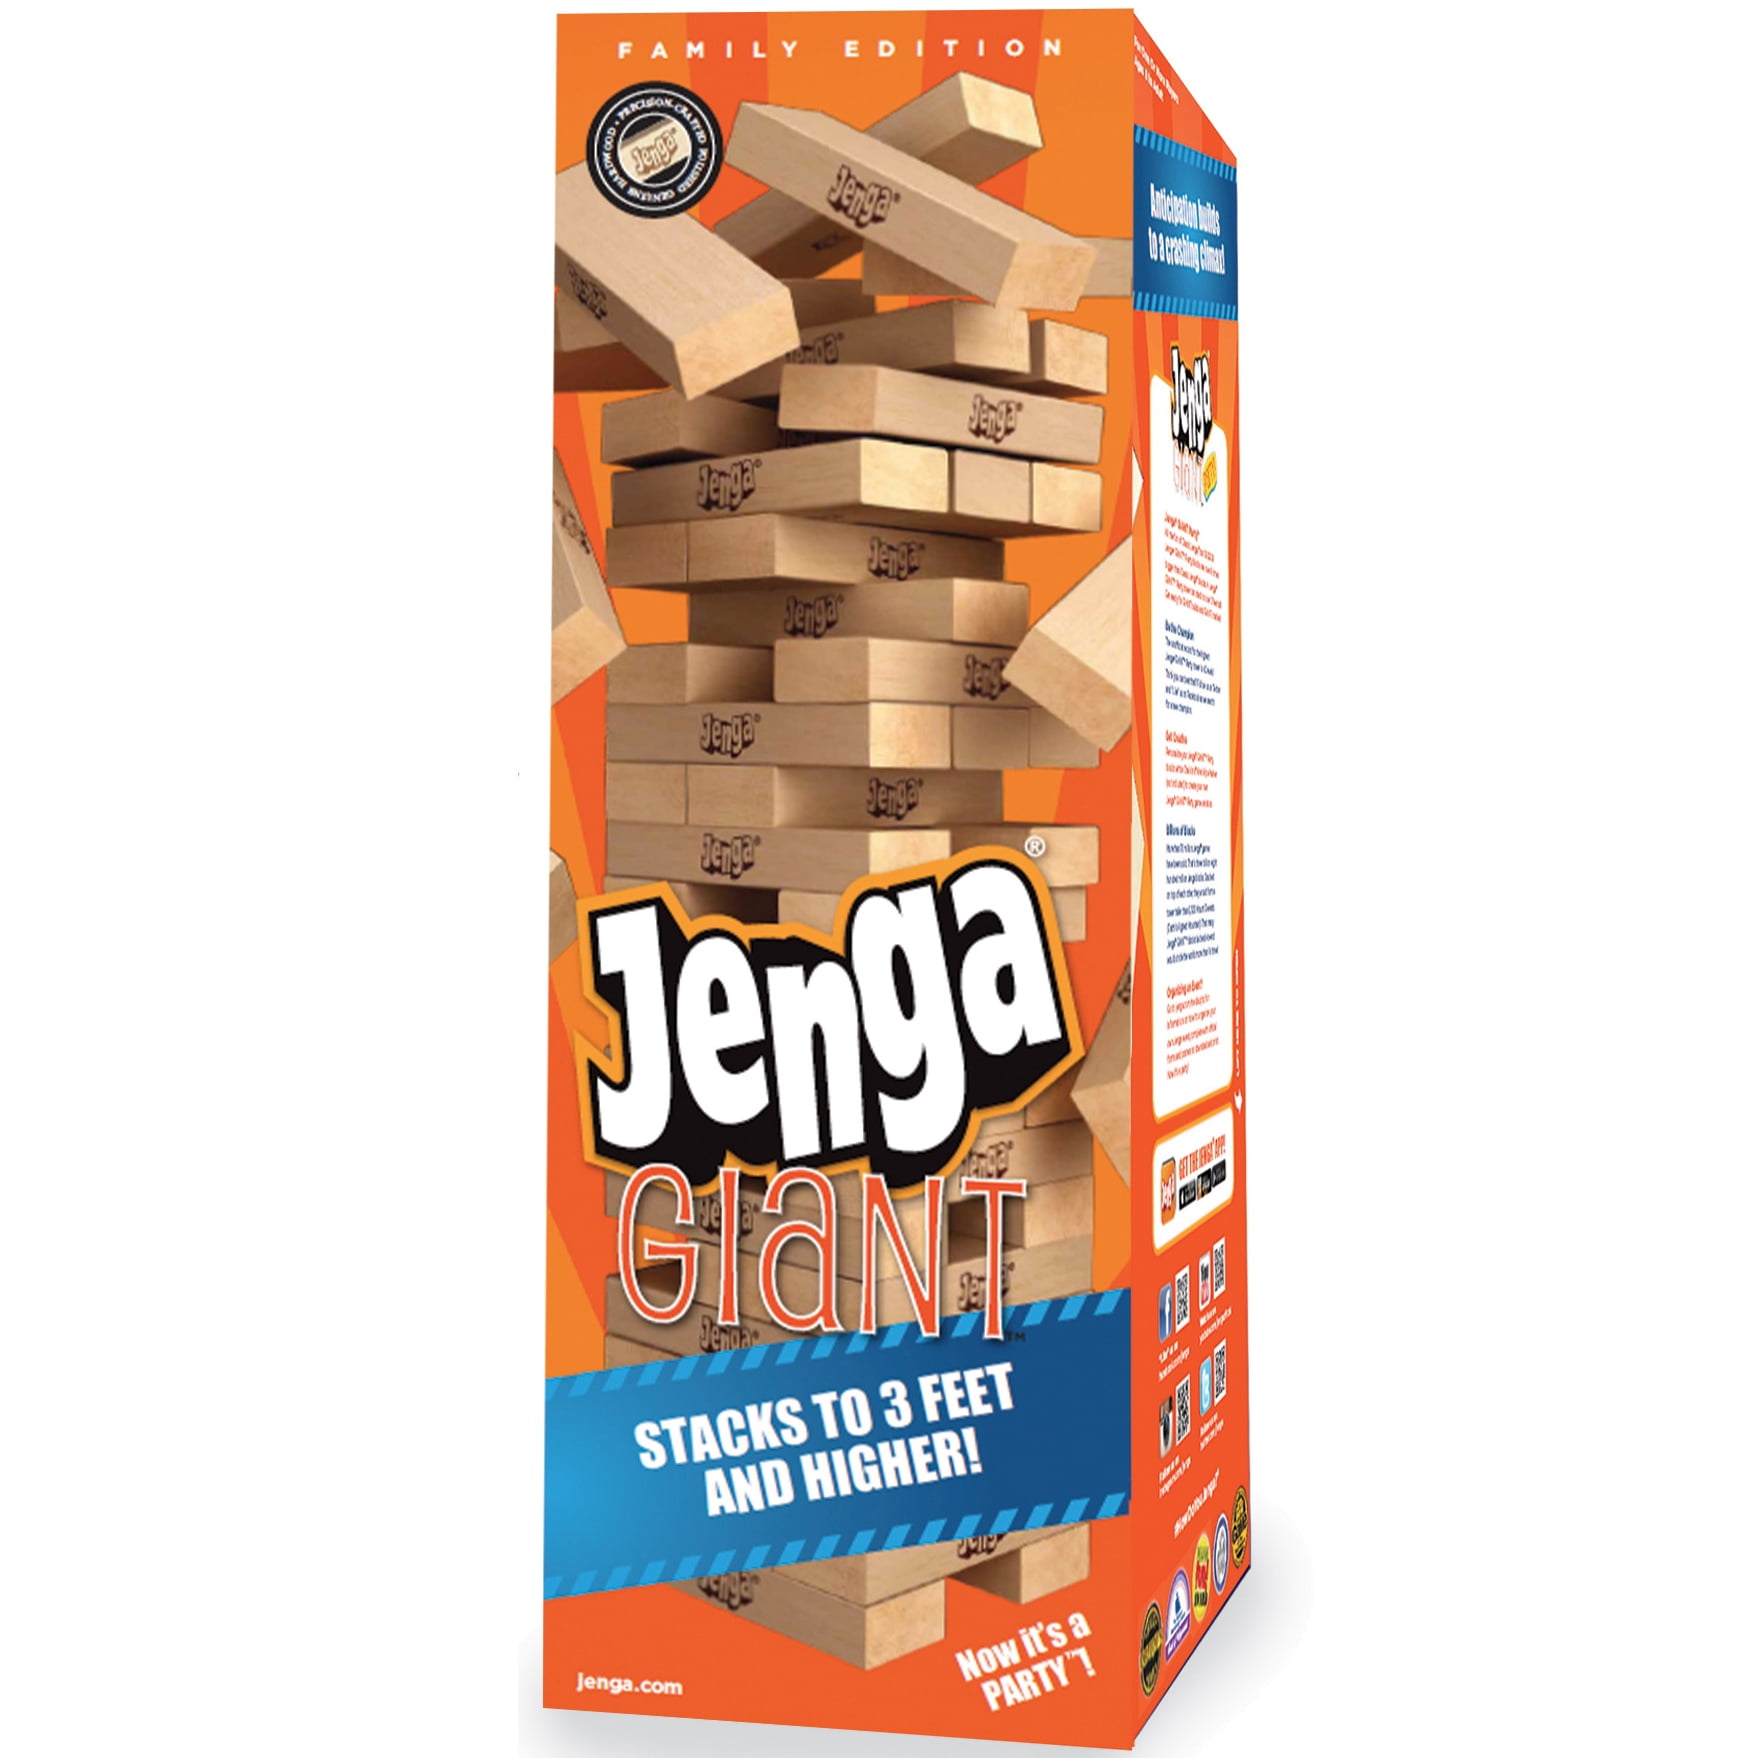 Contemporary Board for sale online Jenga Giant JS7 Hardwood Game Stacks to 5 Feet 